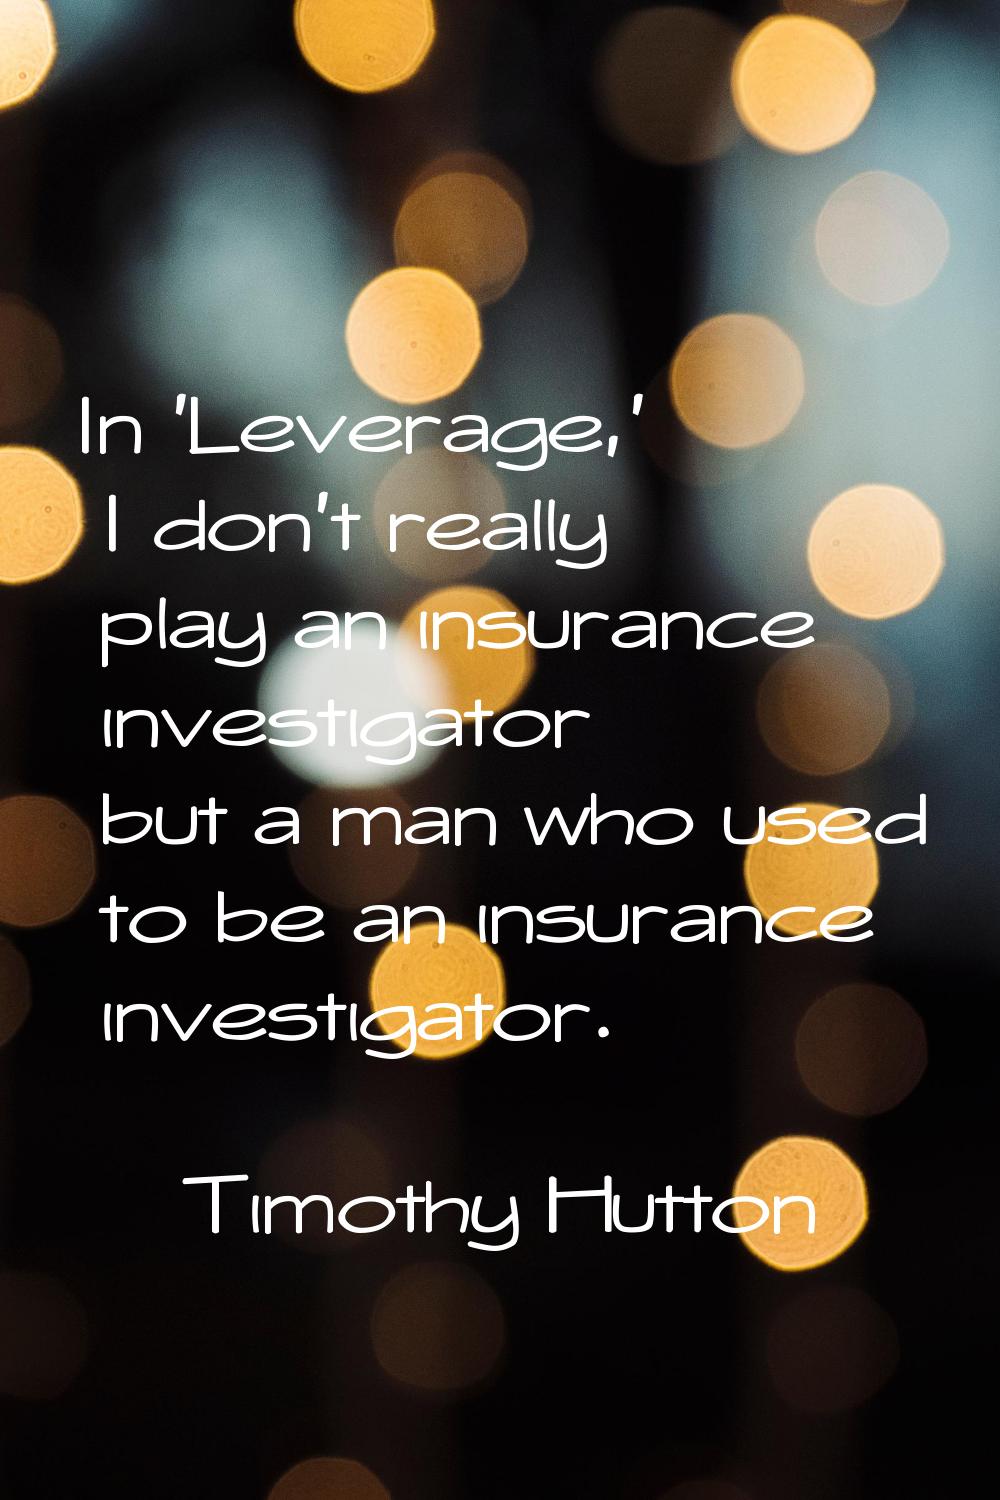 In 'Leverage,' I don't really play an insurance investigator but a man who used to be an insurance 